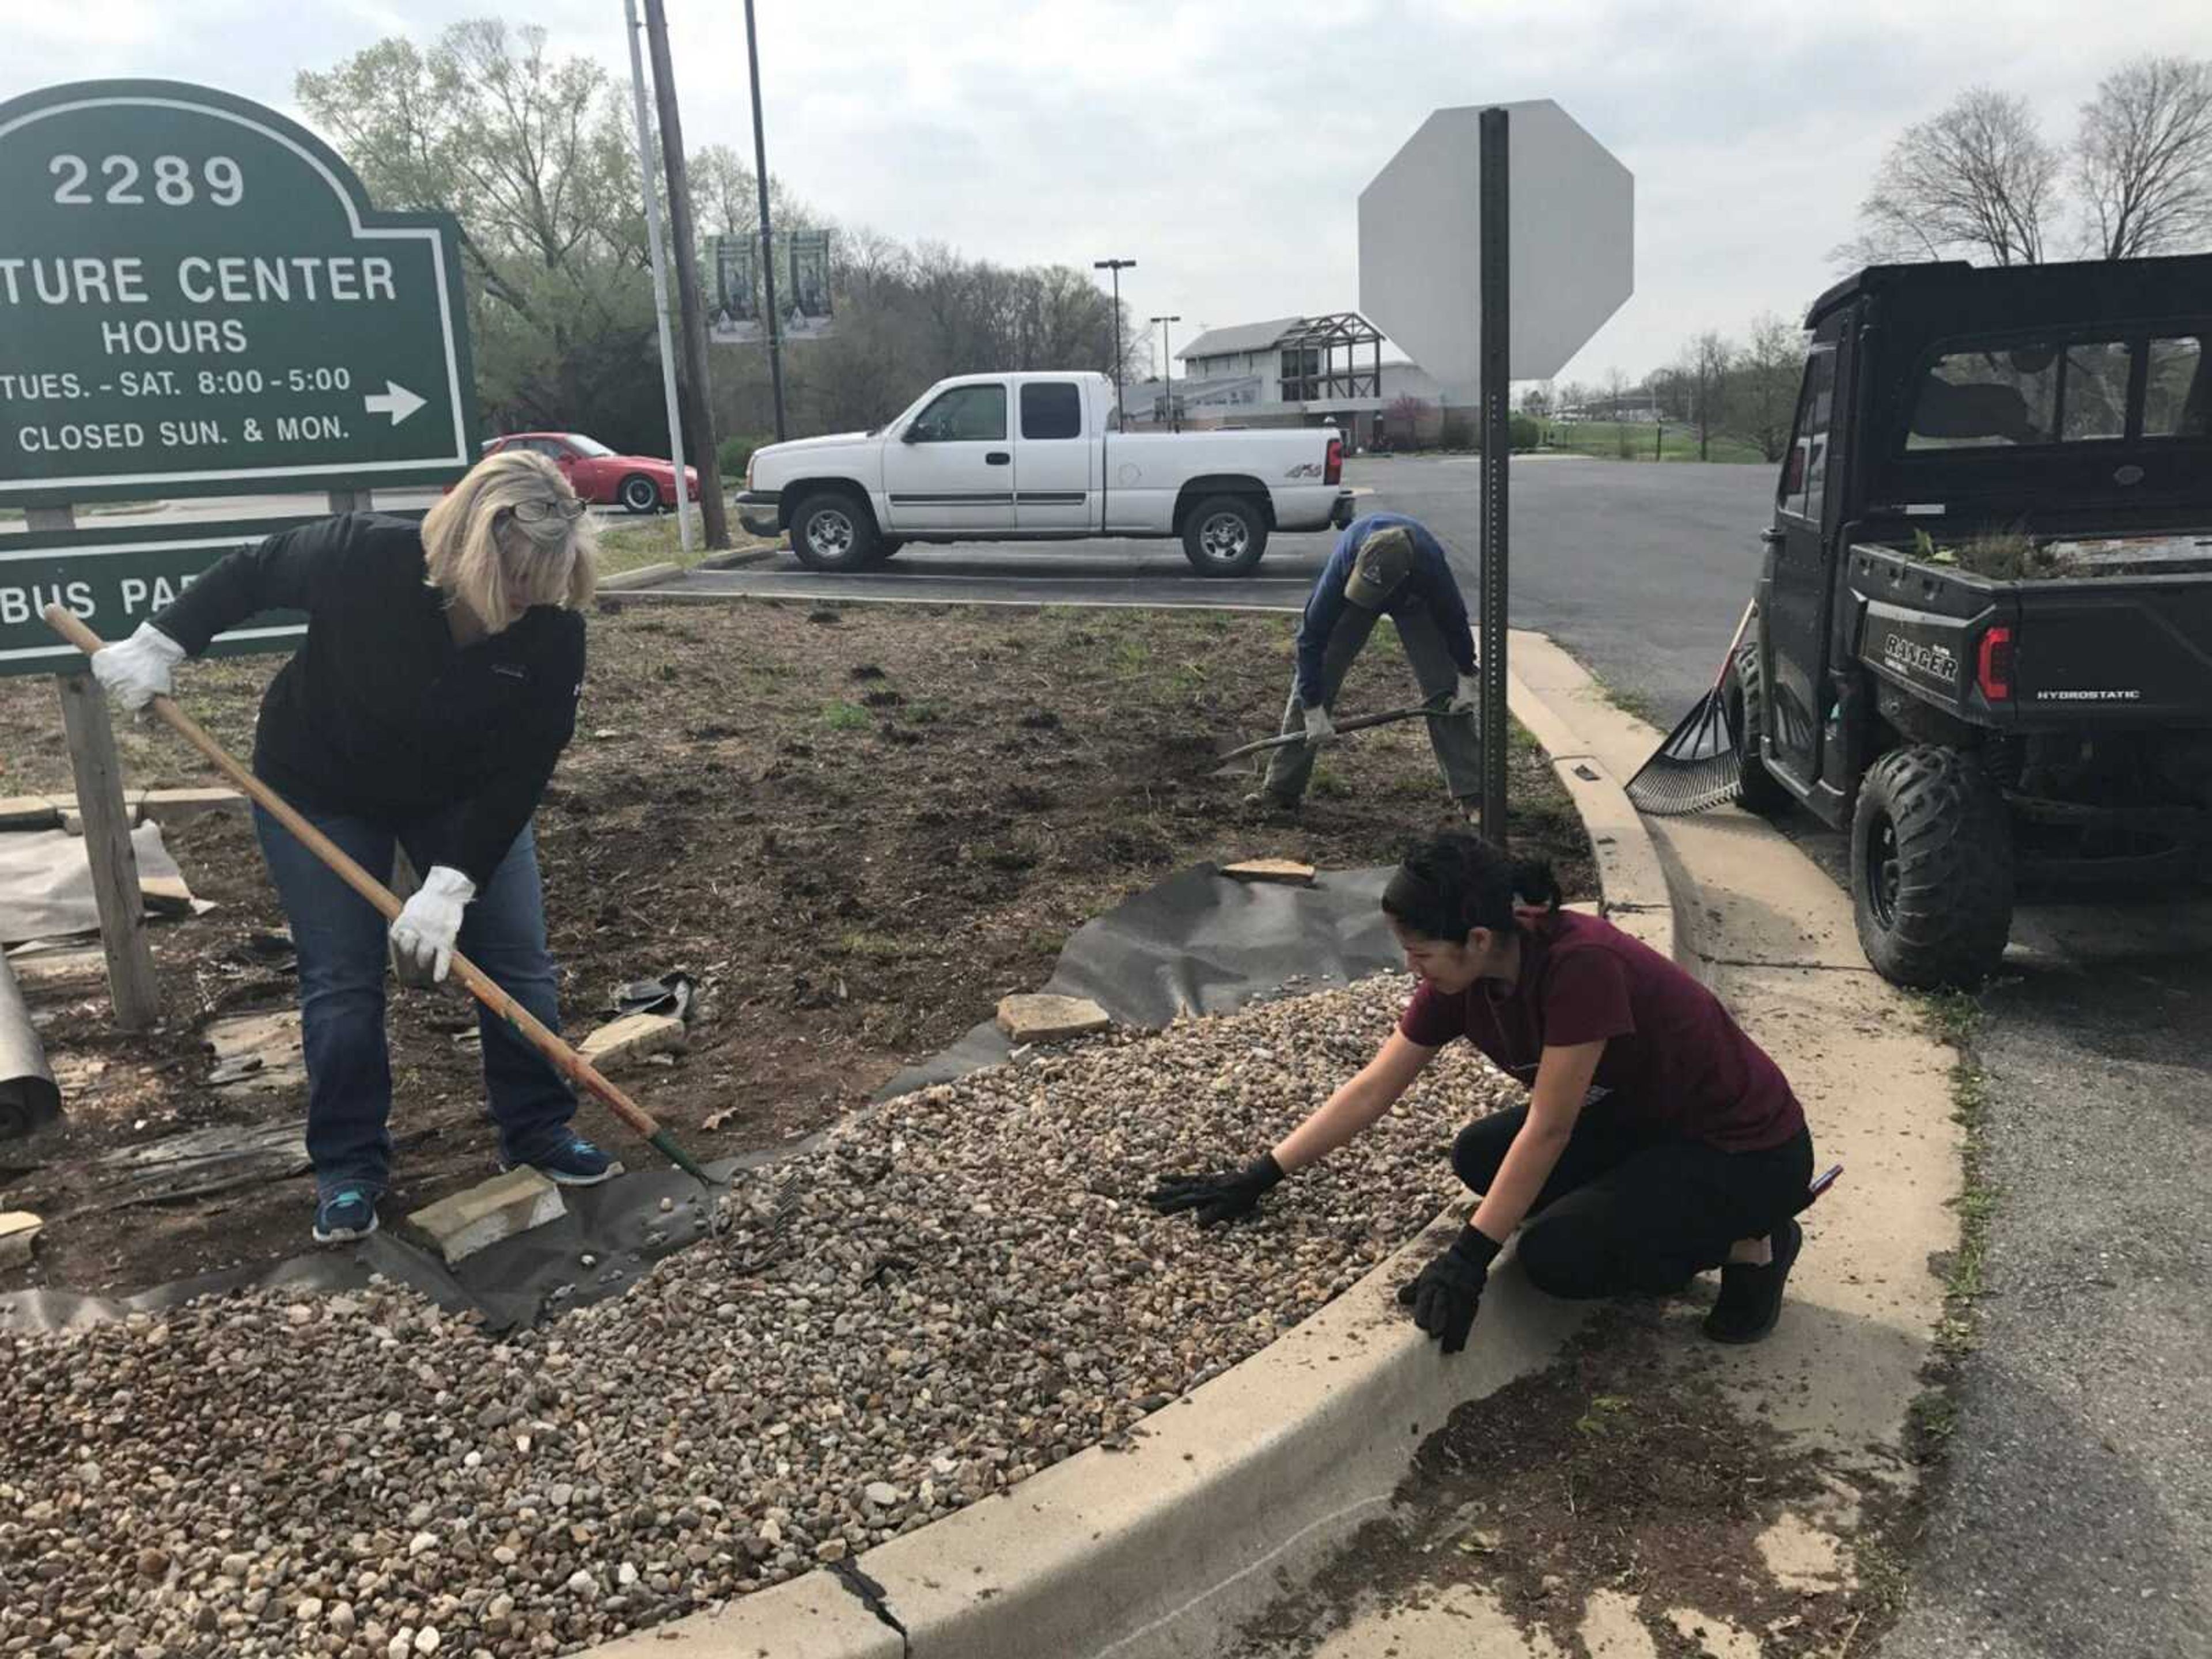 Southeast Serves completes projects over weekend